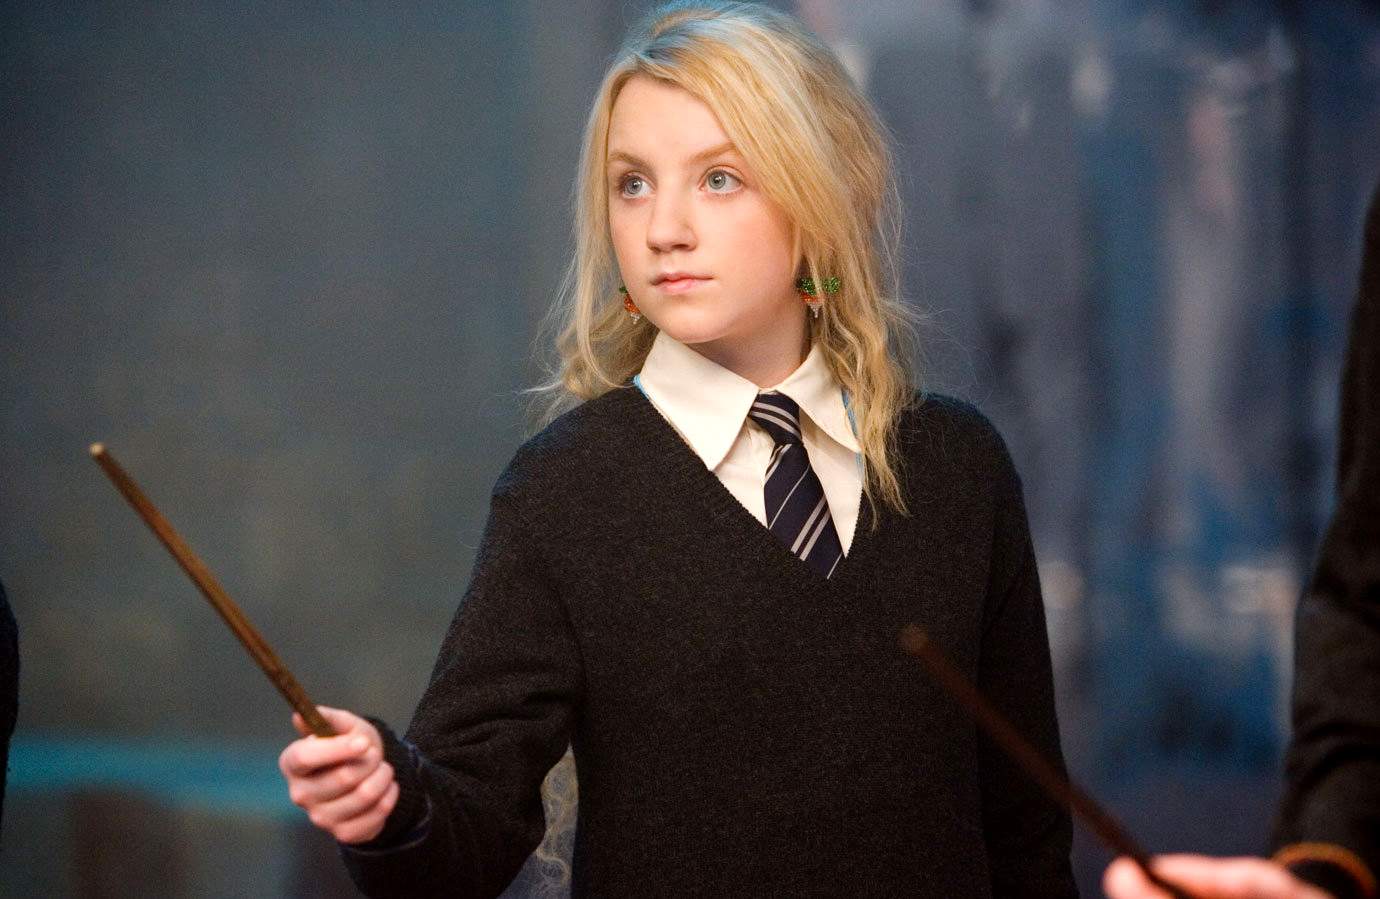 Evanna Lynch as Luna Lovegood in Warner Bros' Harry Potter and the Order of the Phoenix (2007)